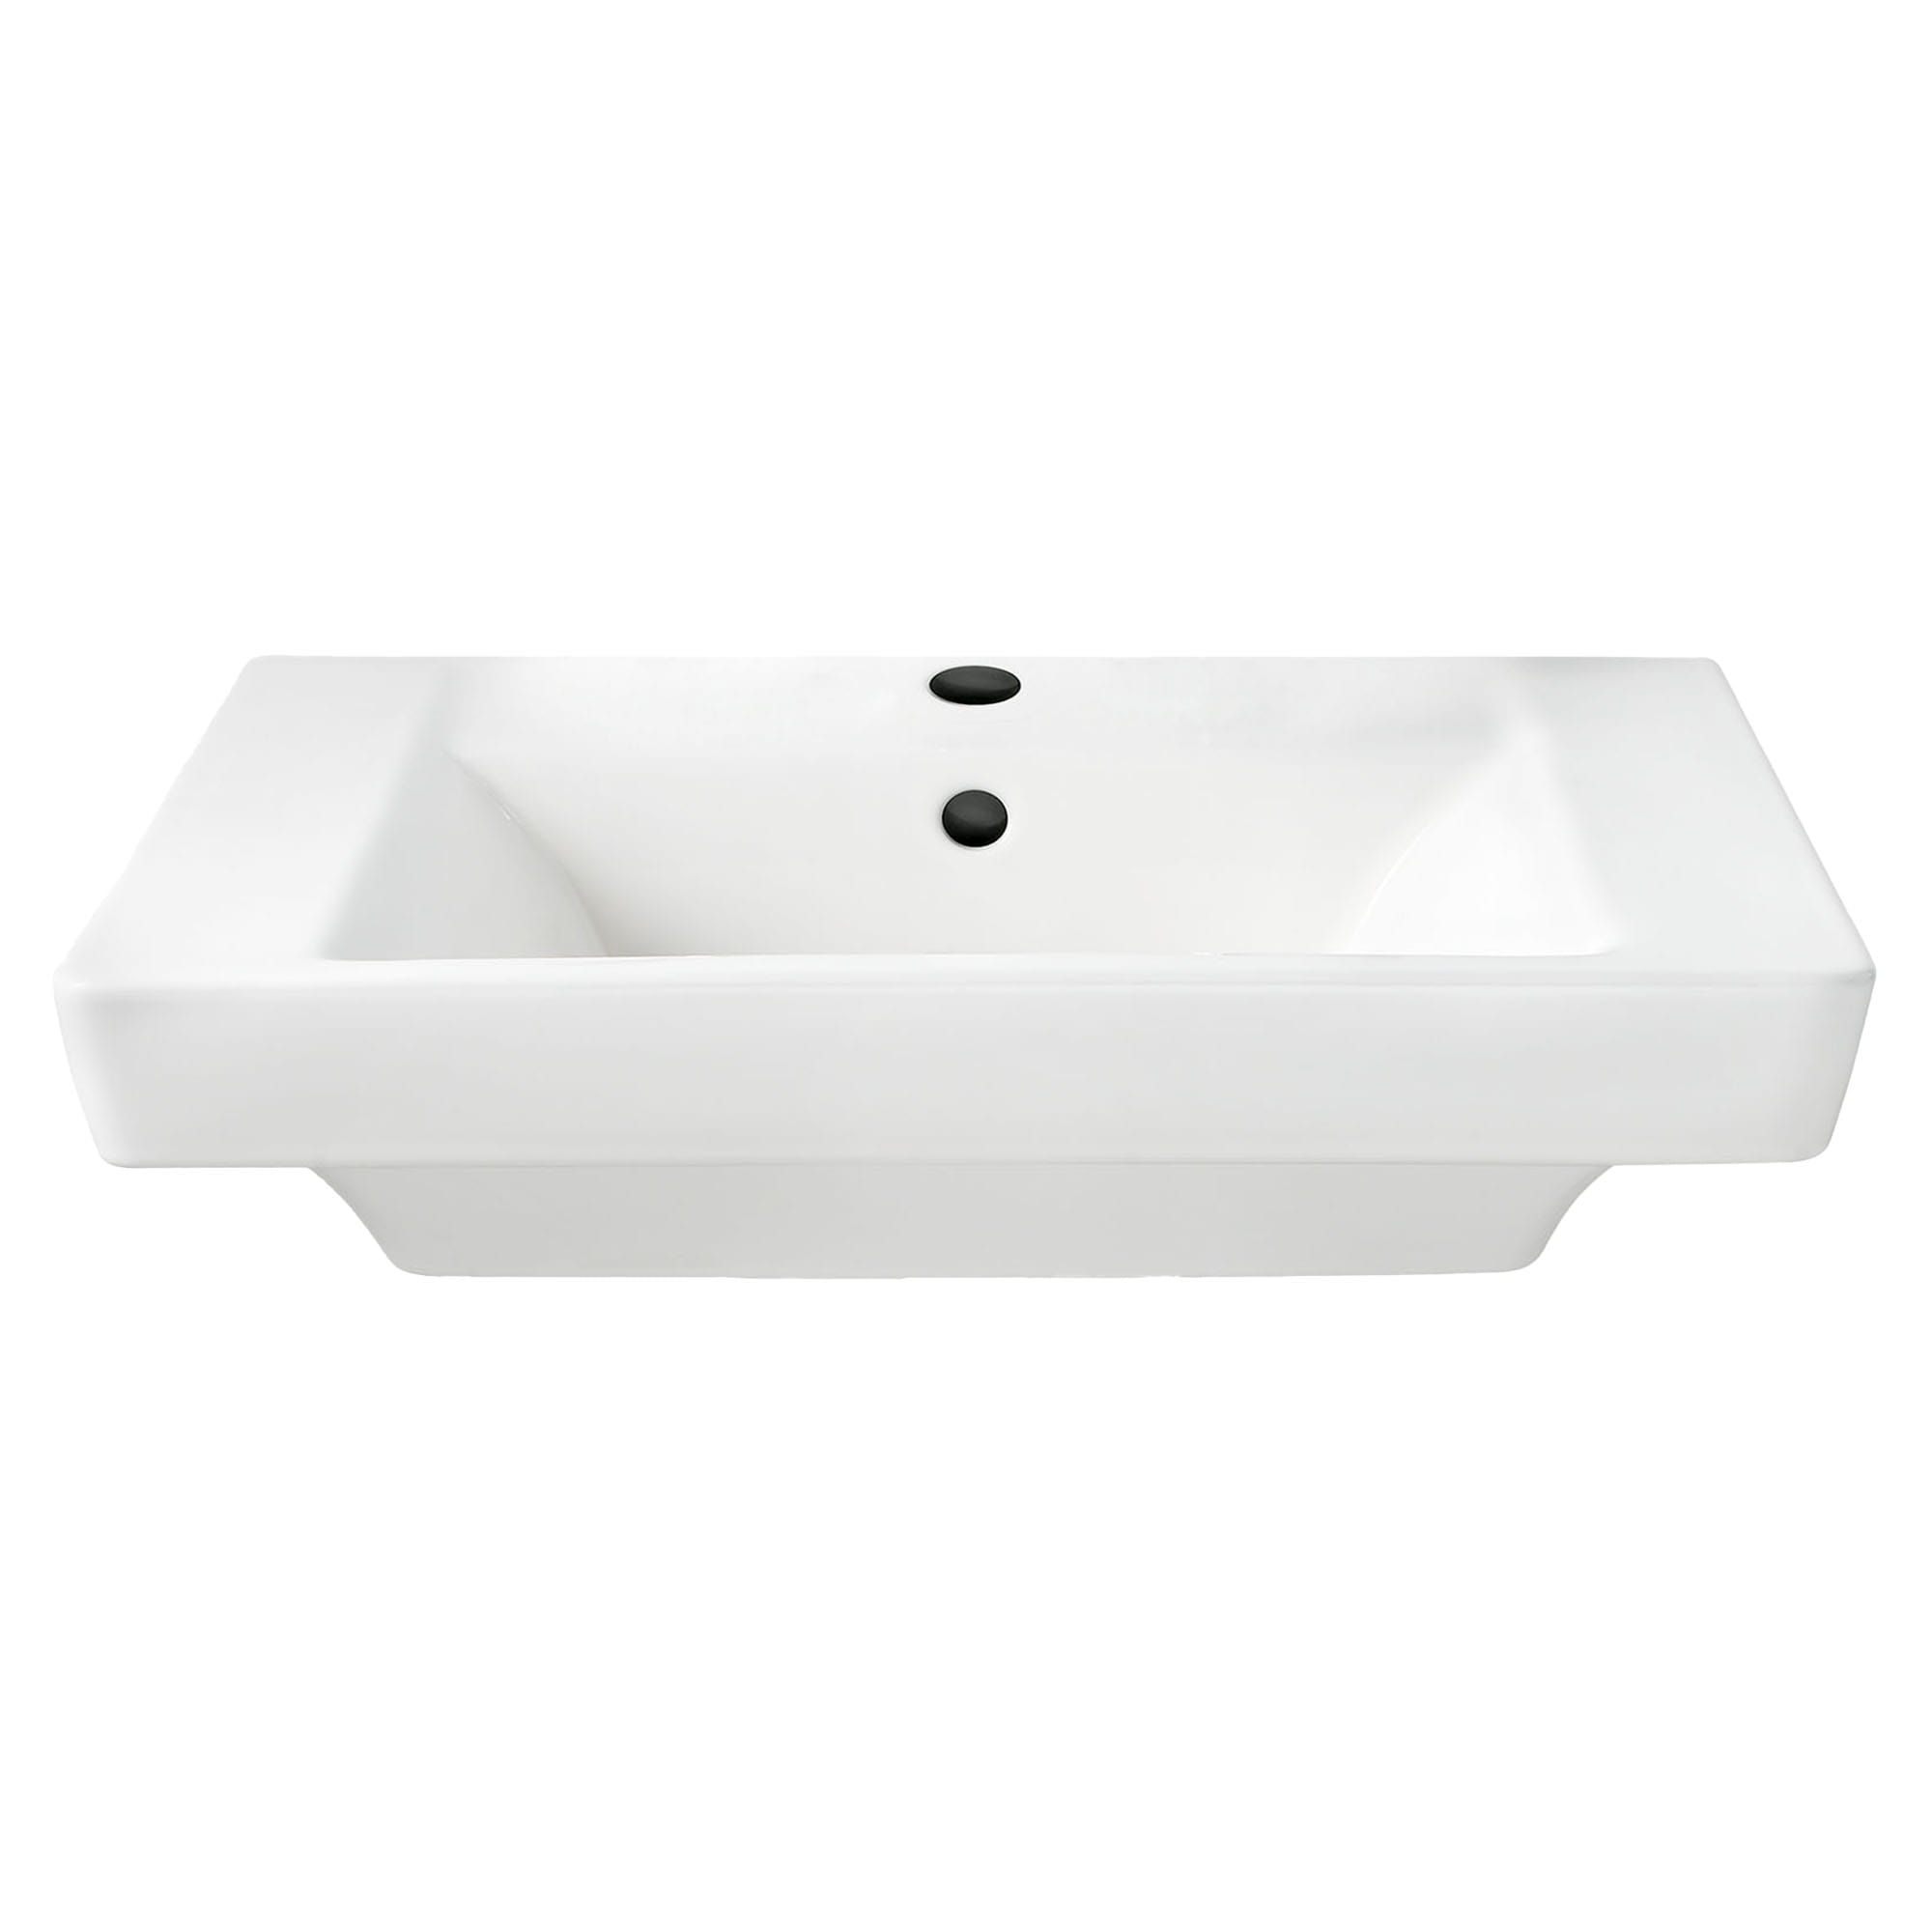 Boulevard Center Hole Only Pedestal Sink Top WHITE